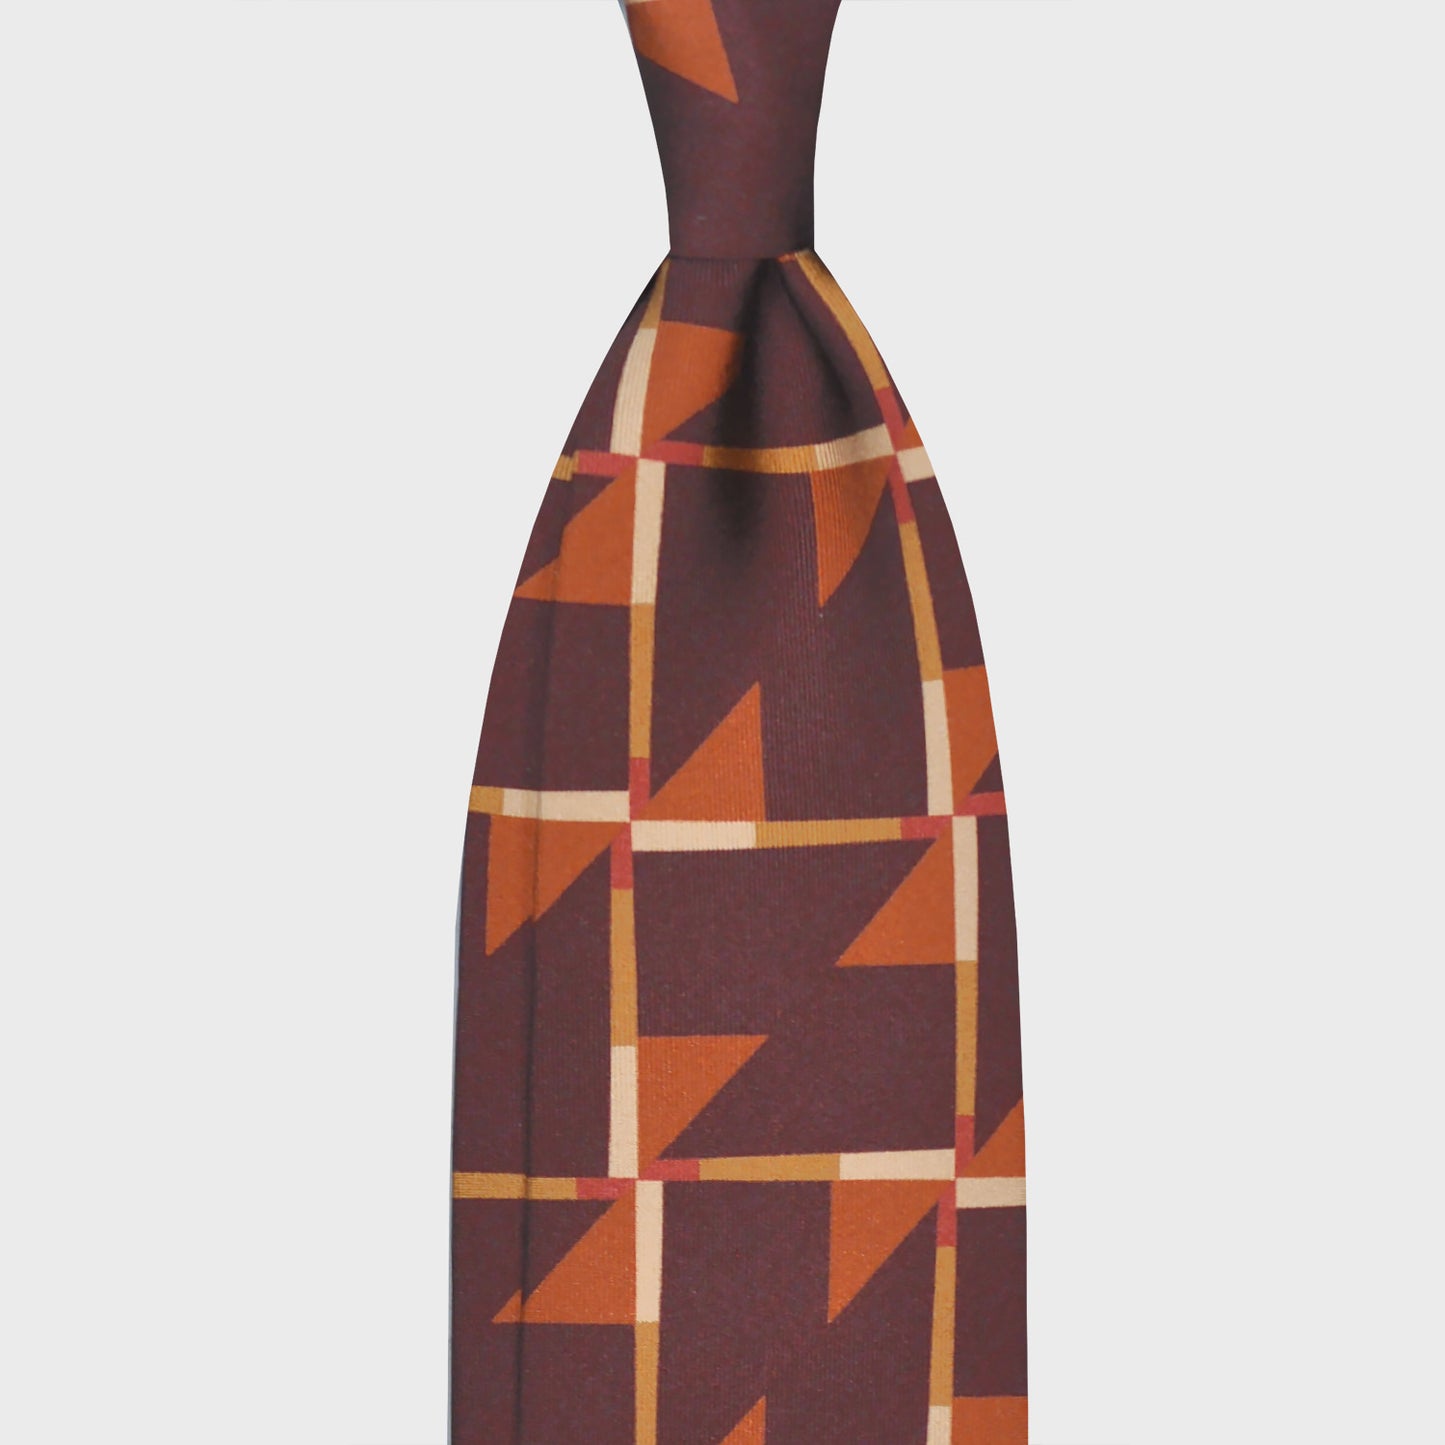 Coffee Brown Art Decò Pattern Silk Neckties. Refined deco tie made with finest Italian silk soft to the touch, coffee brown background with orange and ocra Art Decò pattern, unlined tie 3 folds, this Art Deco ties is a exclusive pattern made by Wools Boutique Uomo